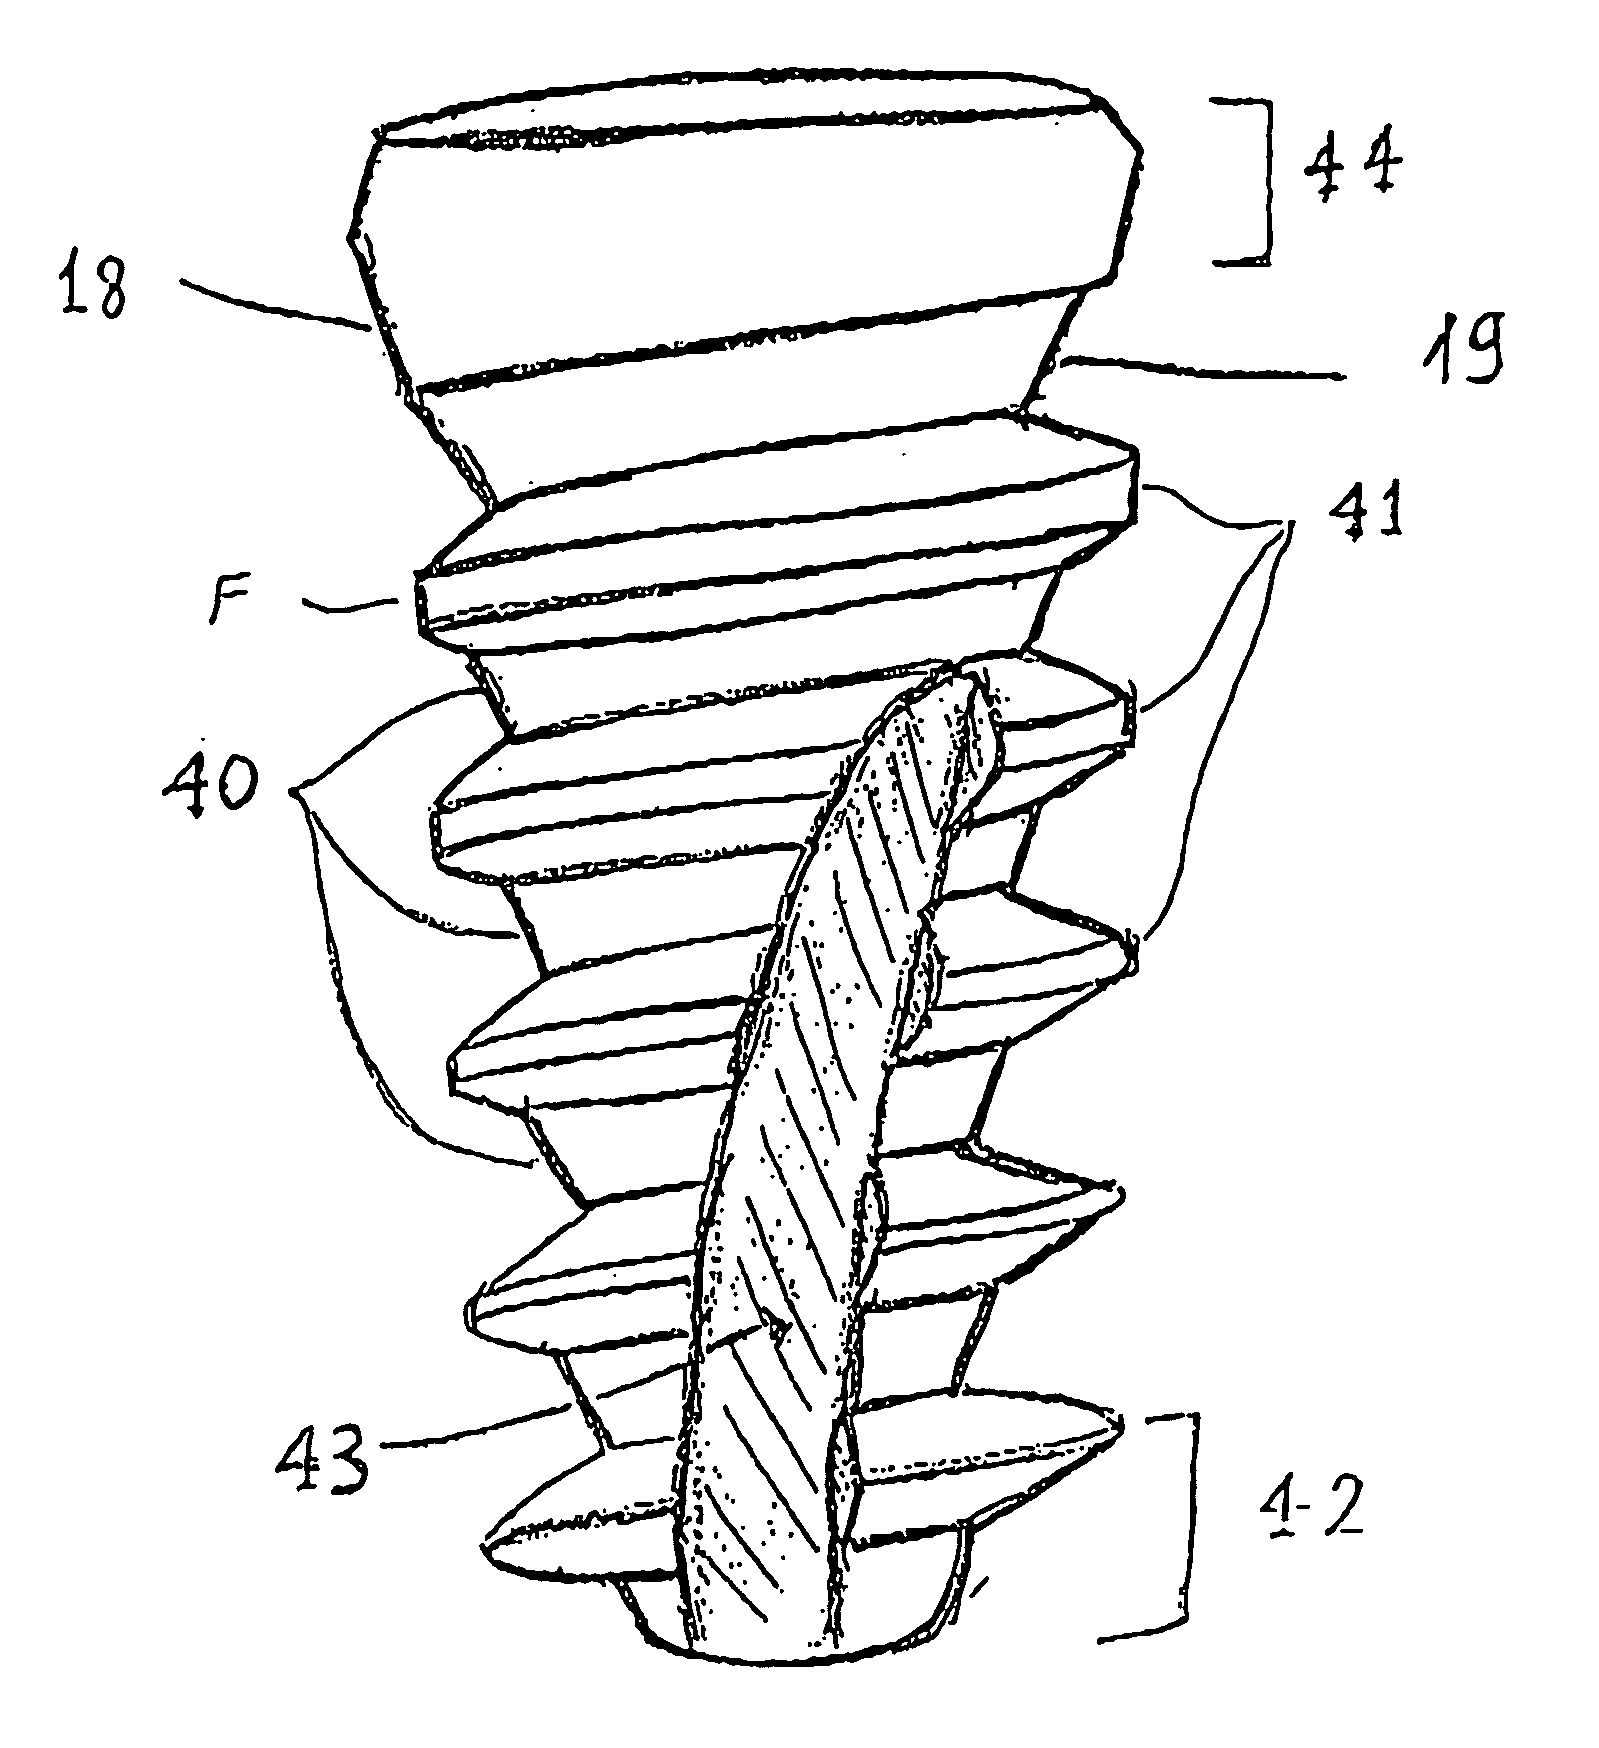 Condensing skeletal implant that facilitate insertions